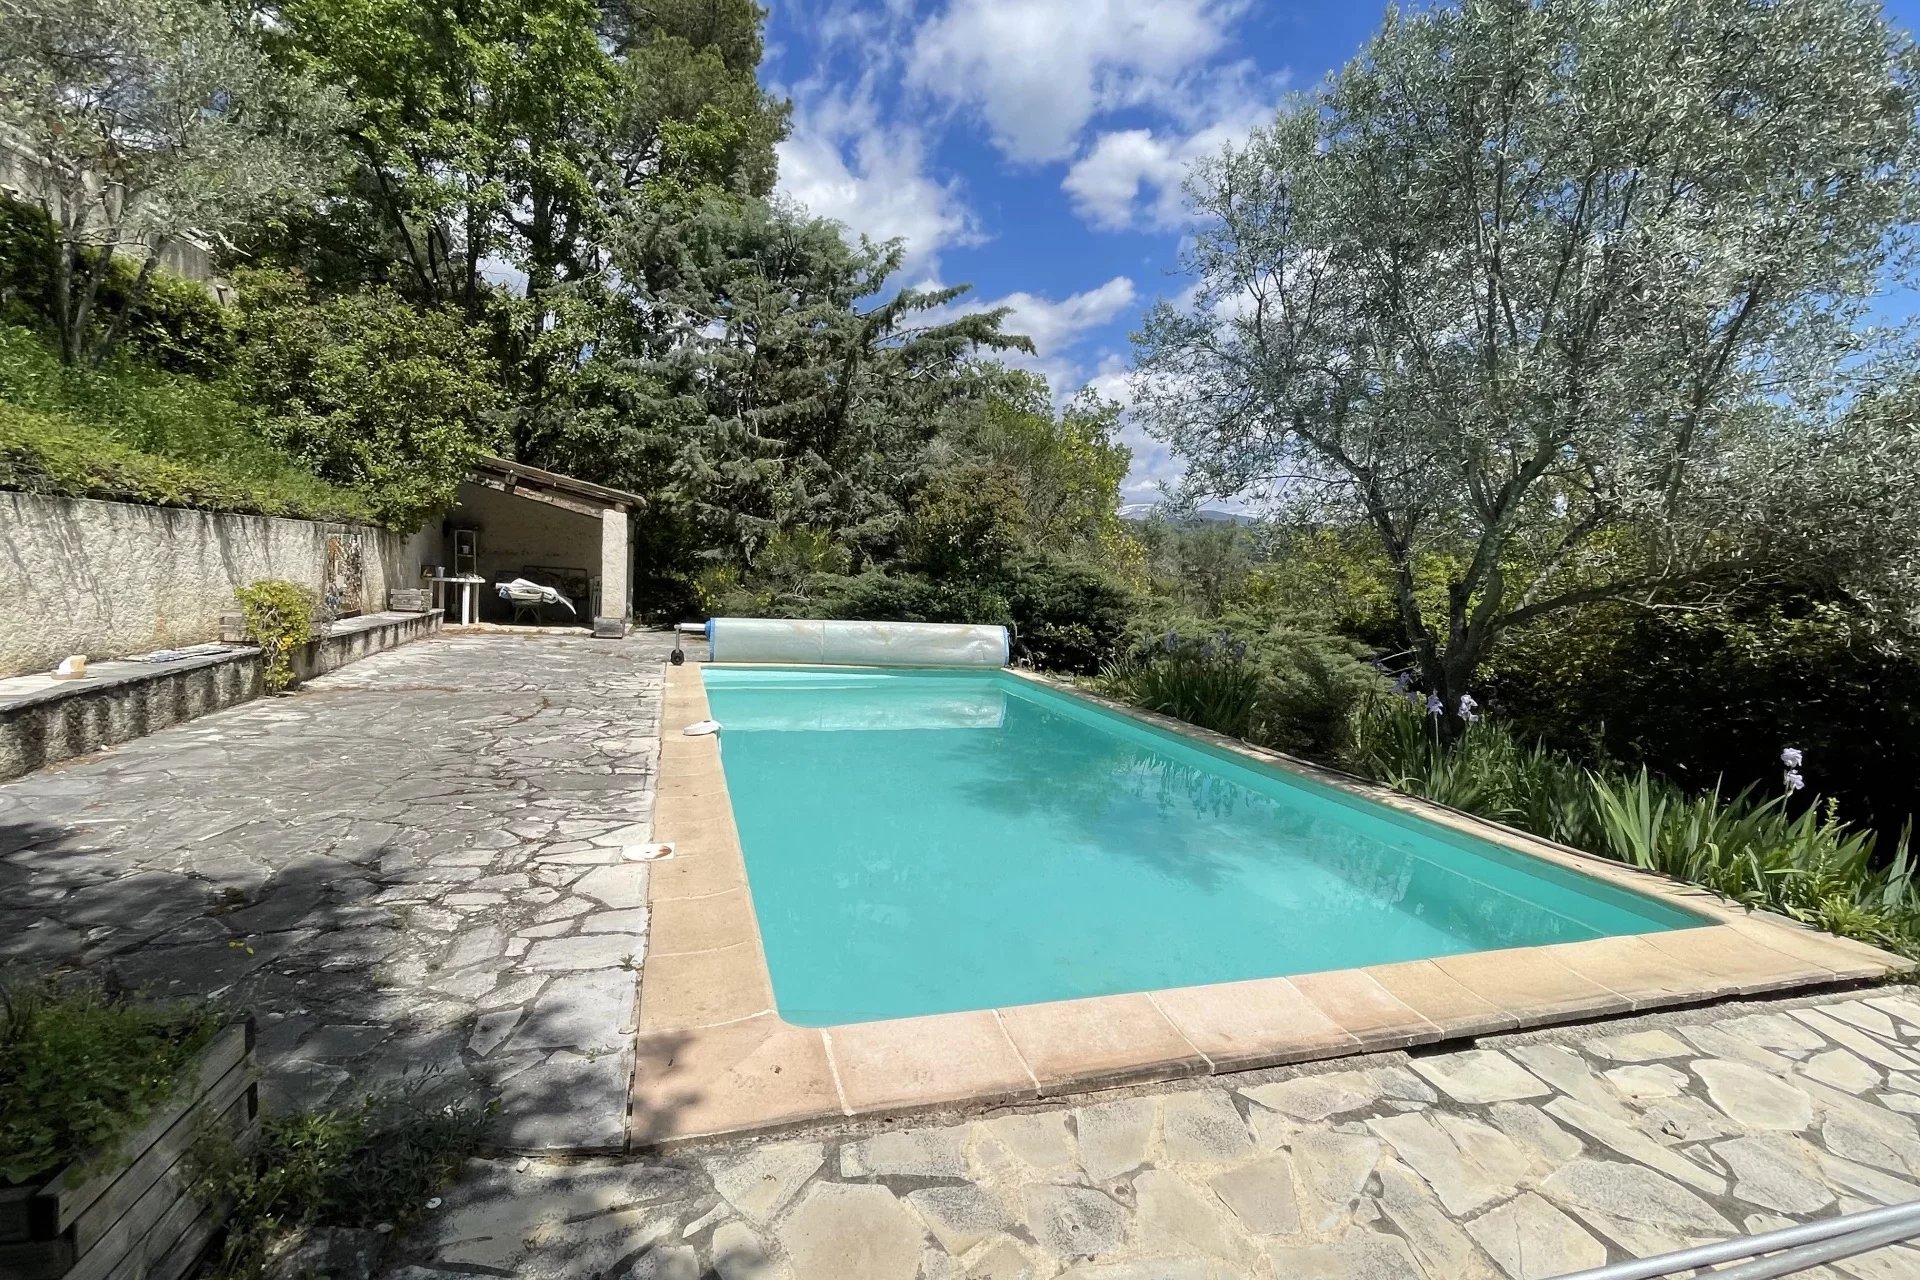 Villa in a quiet area with views of the village - Fayence